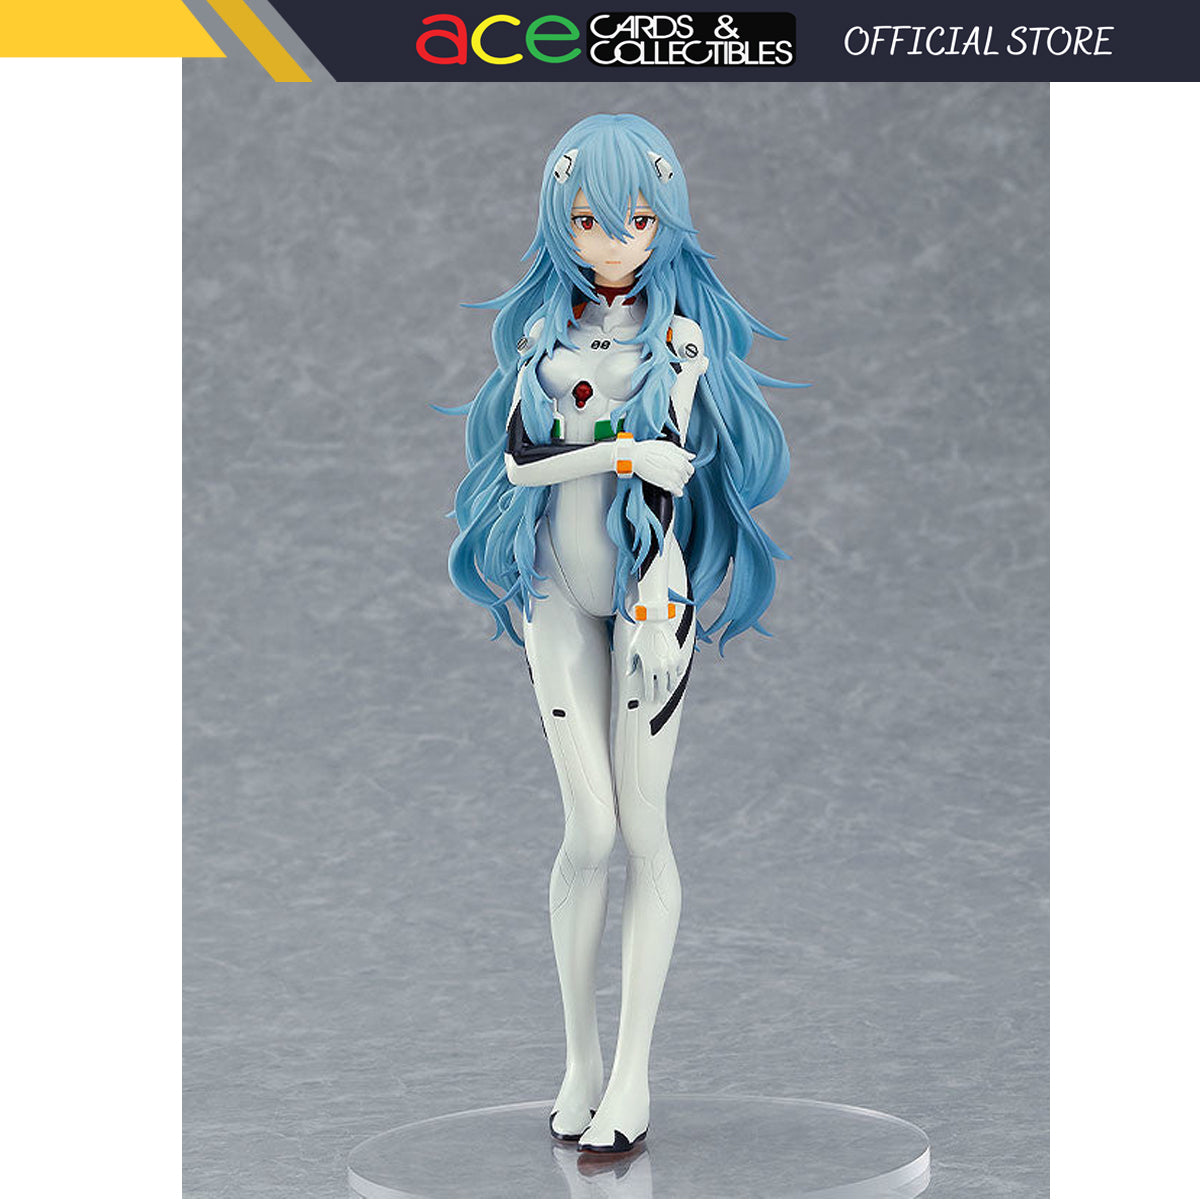 Rebuild of Evangelion Pop Up Parade "Rei Ayanami" (Long Hair Ver.)-Good Smile Company-Ace Cards & Collectibles